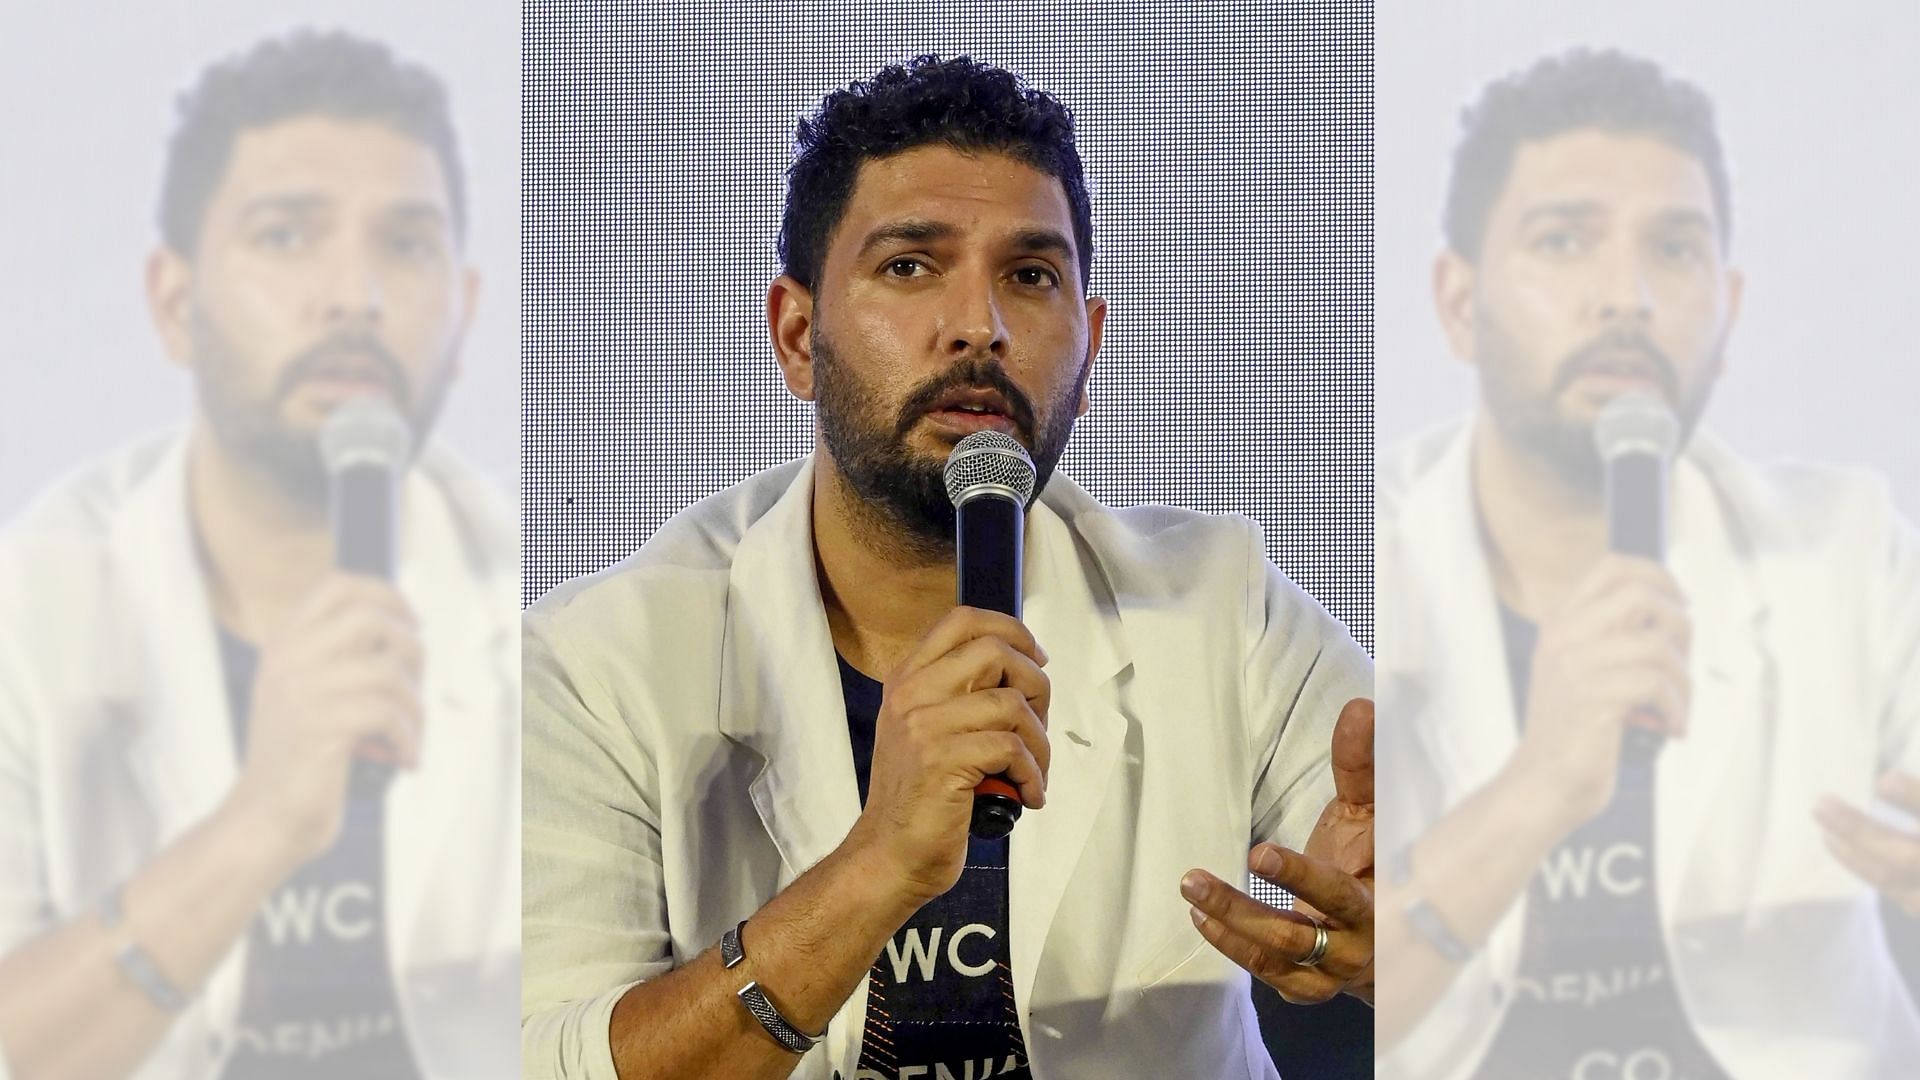 Yuvraj Singh announced retirement on Monday, 10 June, after a two-decade career in cricket.